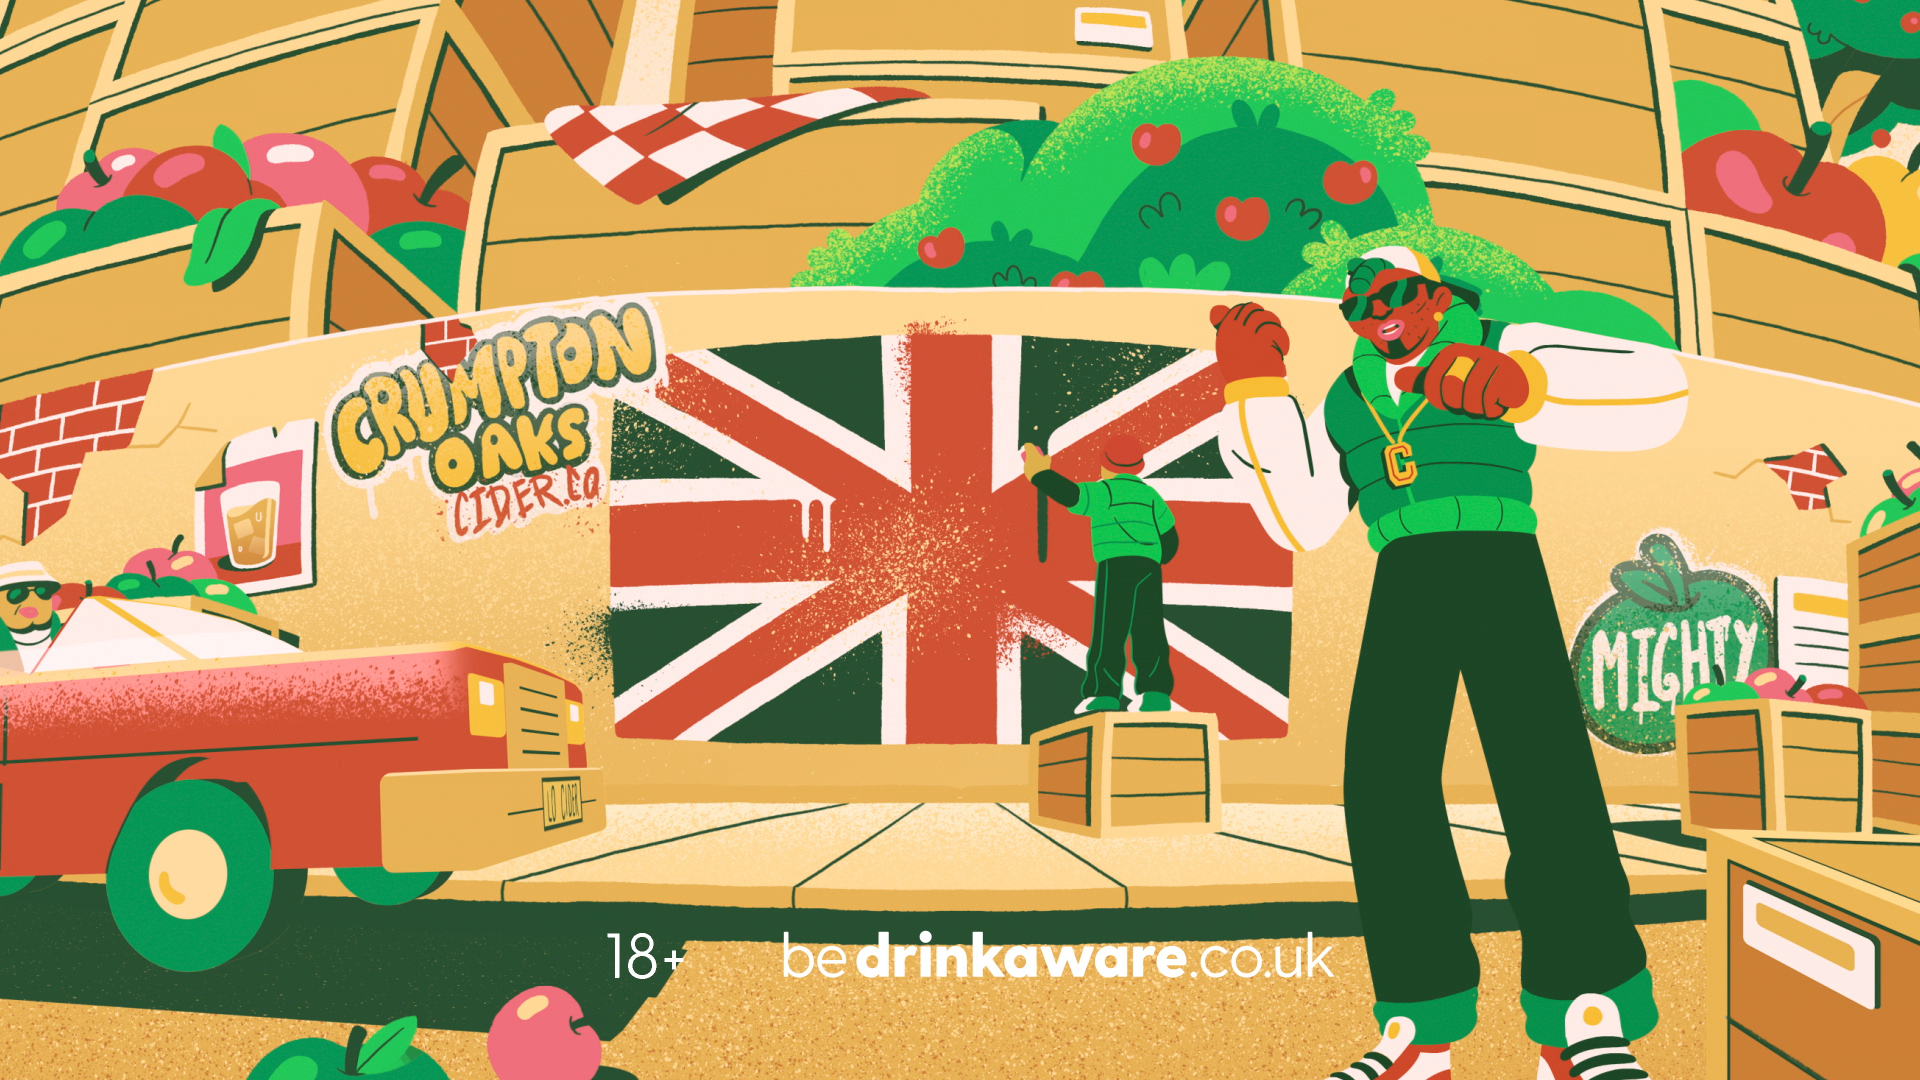 Aston Manor leads with disruptive campaign bringing attitude to cider